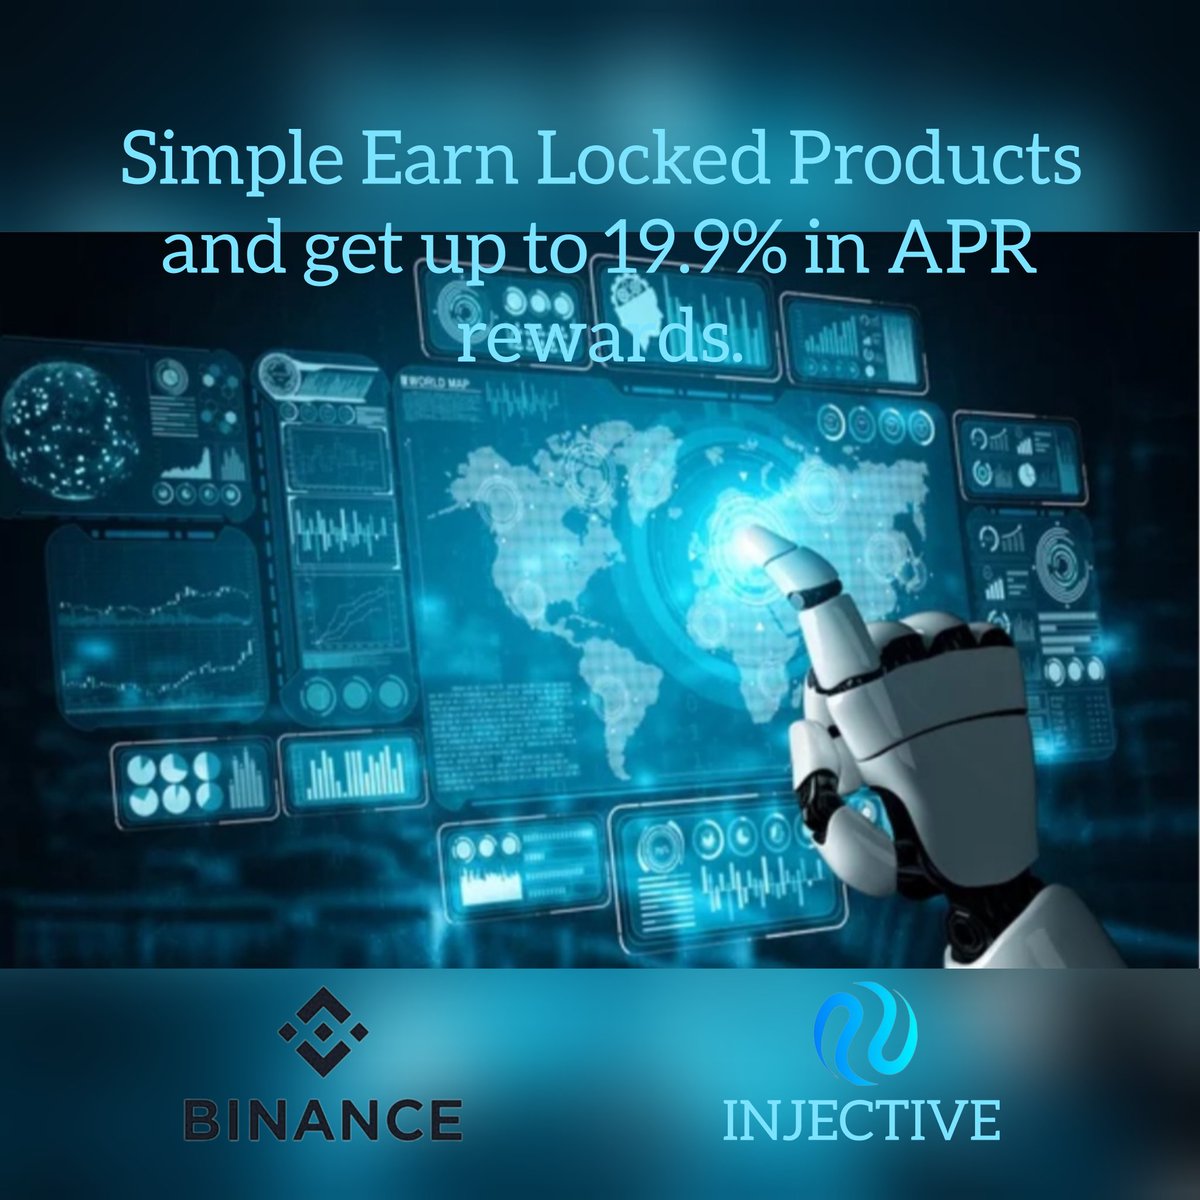 Amazing rewards for @binance 19.9 APR if you staking #INJ @Injective_ #Injective #crypto #bitcoin       #cryptocurrency #blockchain #ethereum #btc       #forex #trading #money #cryptonews #cryptotrading #bitcoinmining #cryptocurrencies #investing #Binance